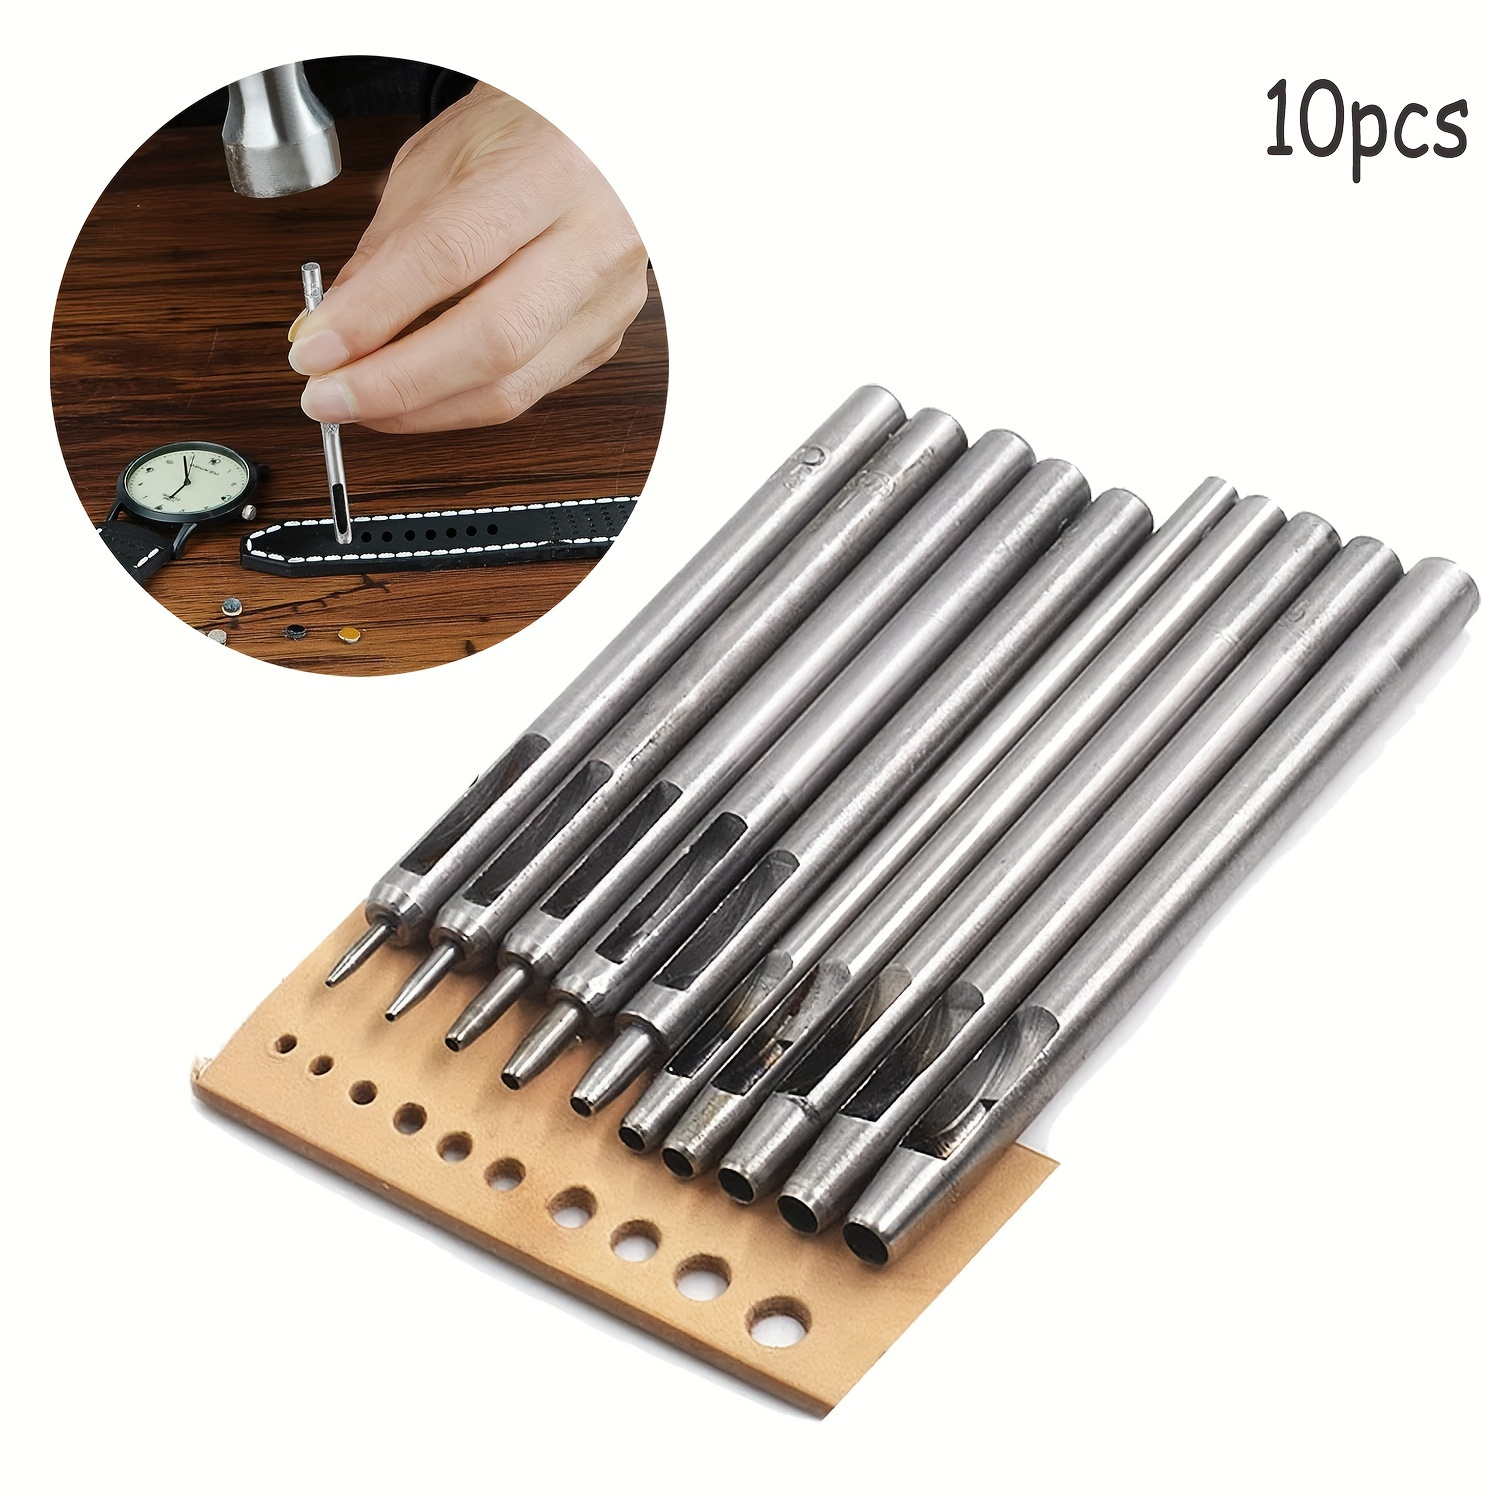 

10pcs Leather Hole Punch Cutter Round Hollow Hole Punch Set Leather Working Tools Diy Leather Craft Punch Tool Kit